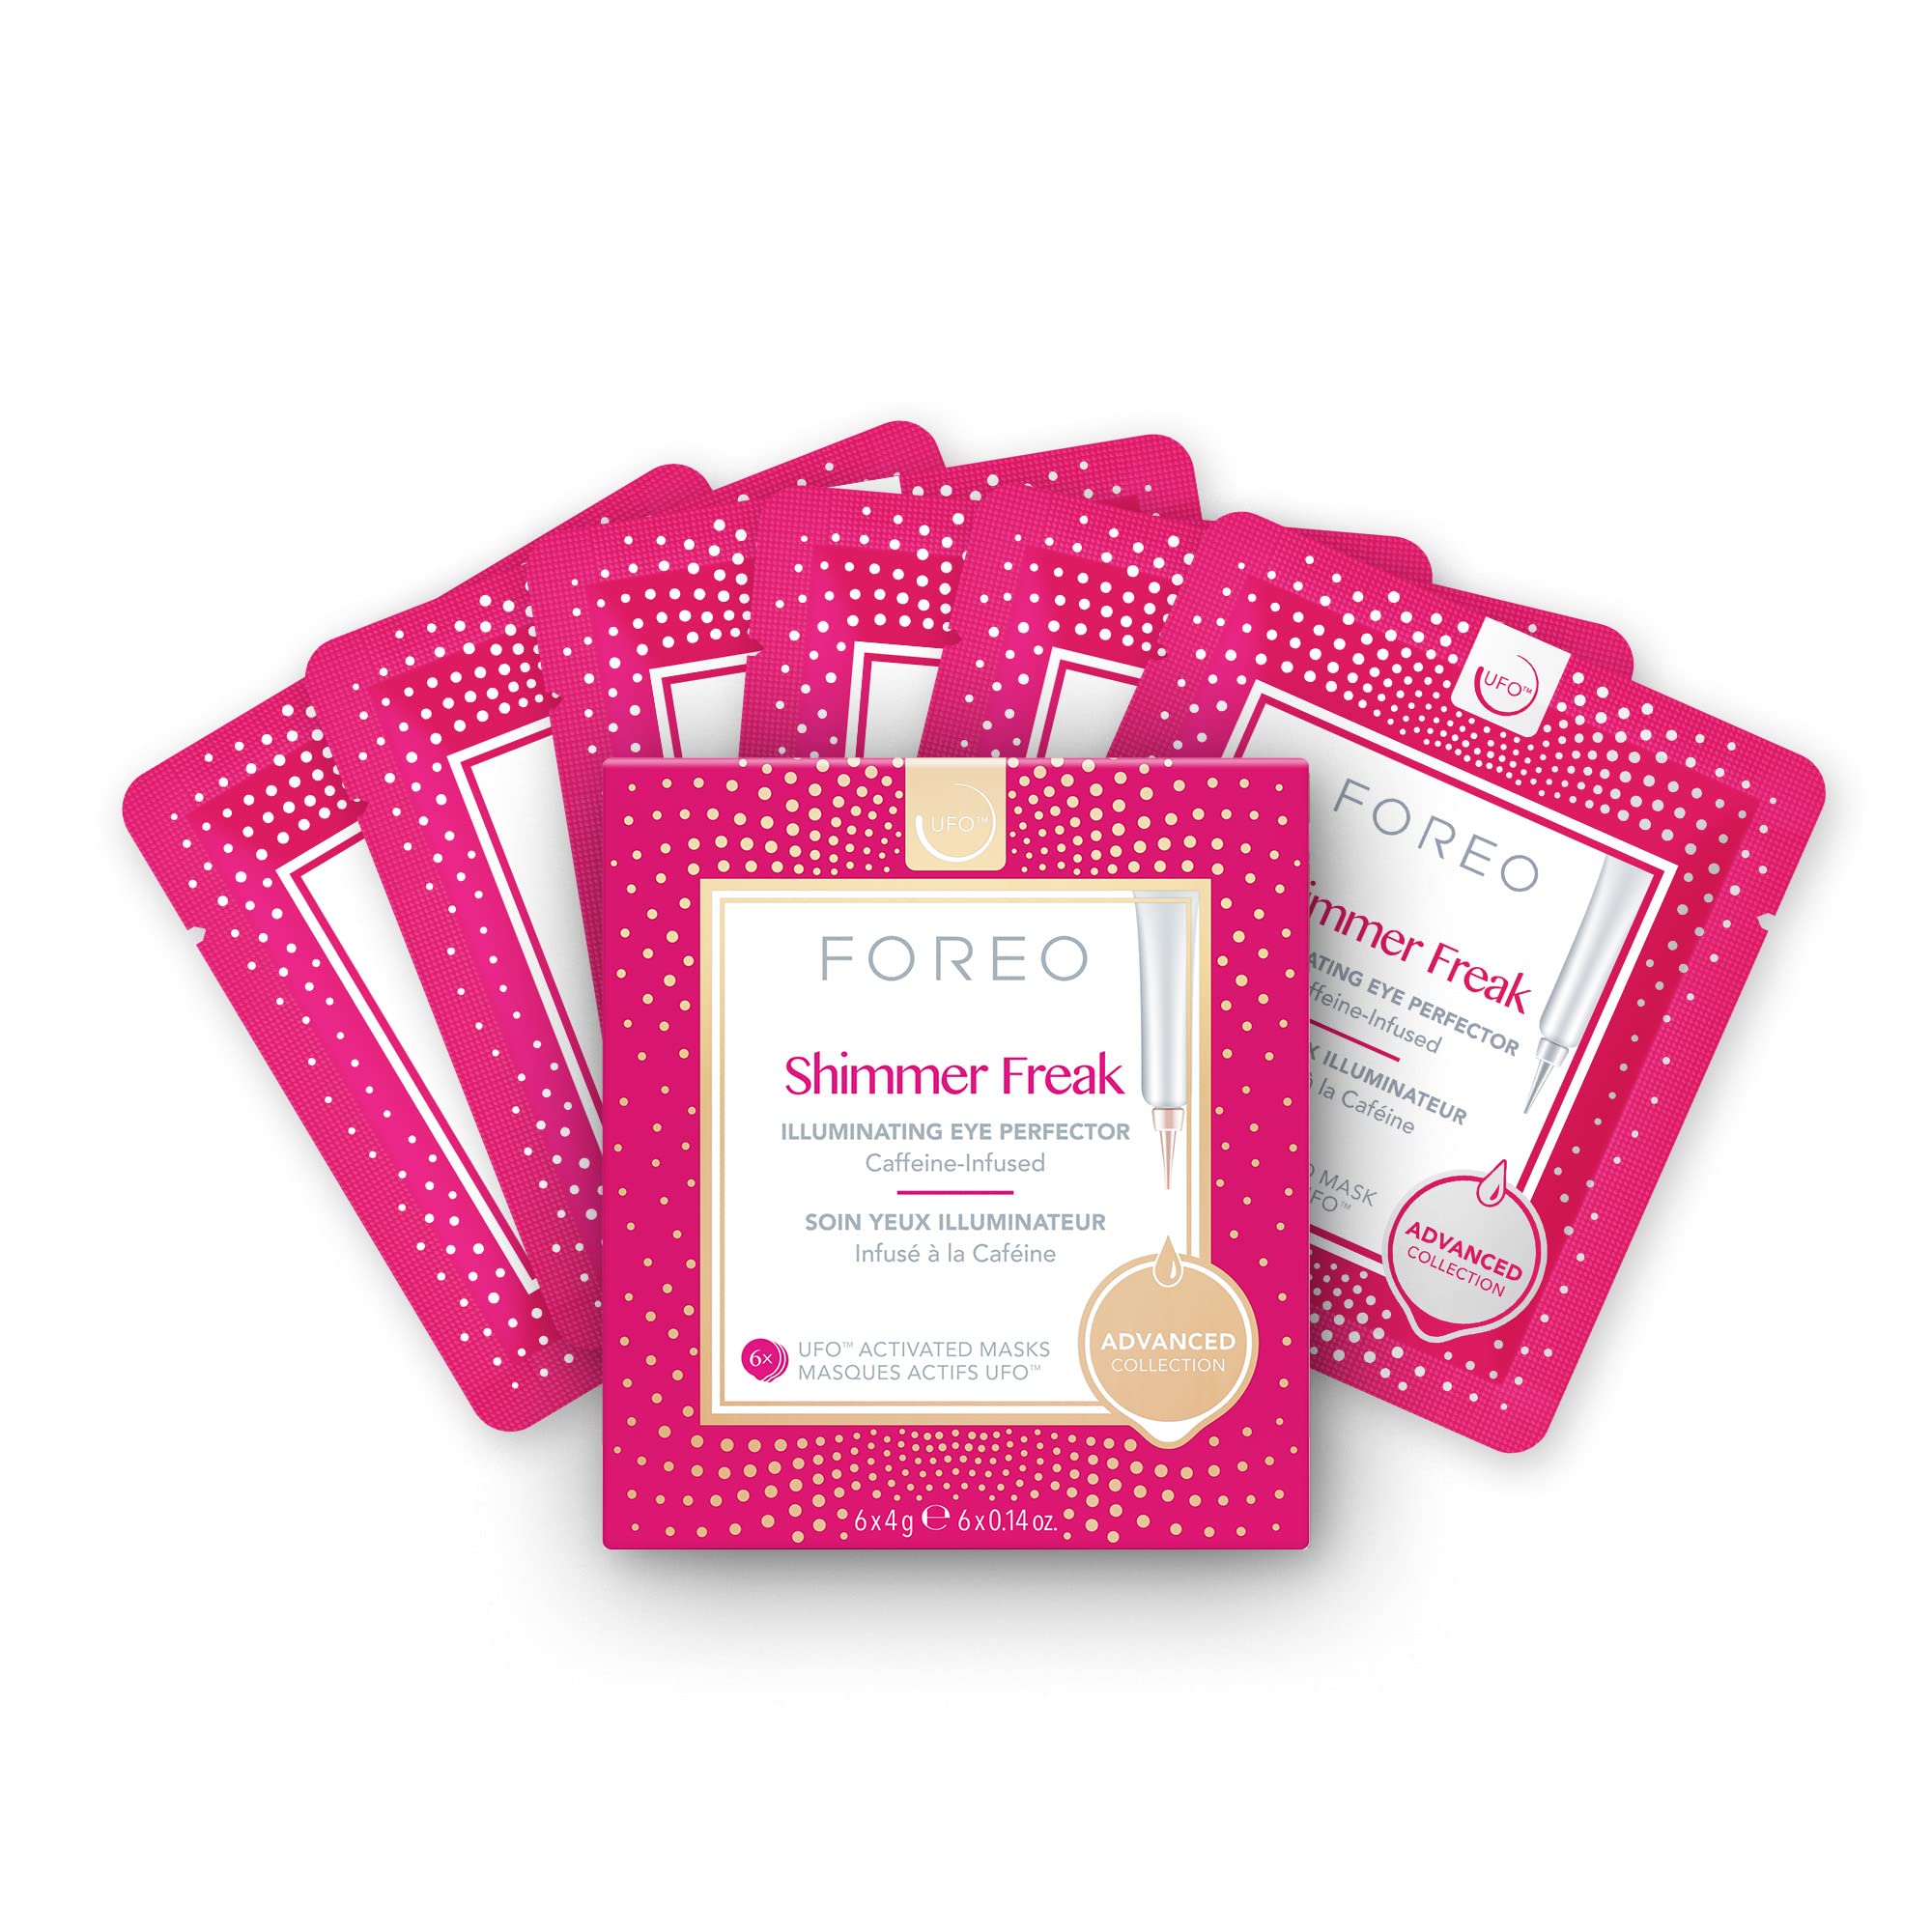 FOREO Shimmer Freak UFO-Activated Facial Niacinamide Mask Types Rose - - - Puffiness Eye 6 - - Wrinkles in Water Illuminating Contour Skin - Pack All - pcs